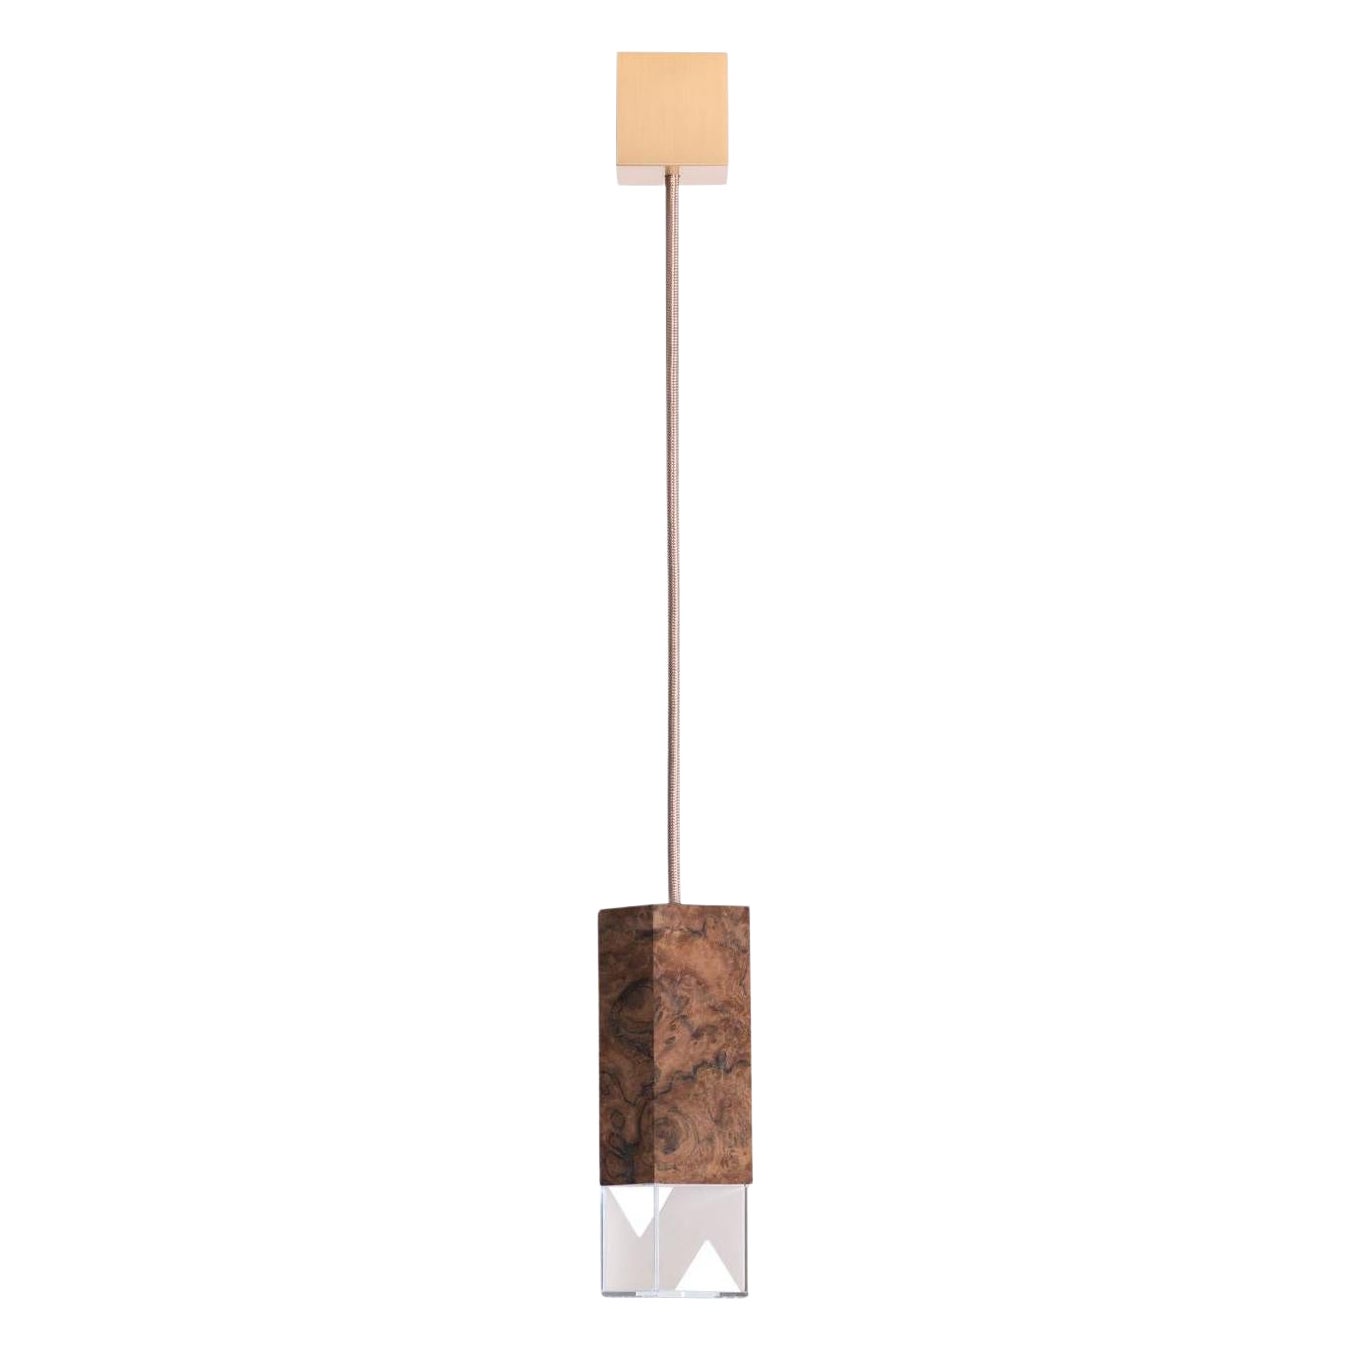 Lamp One Wood 02 by Formaminima